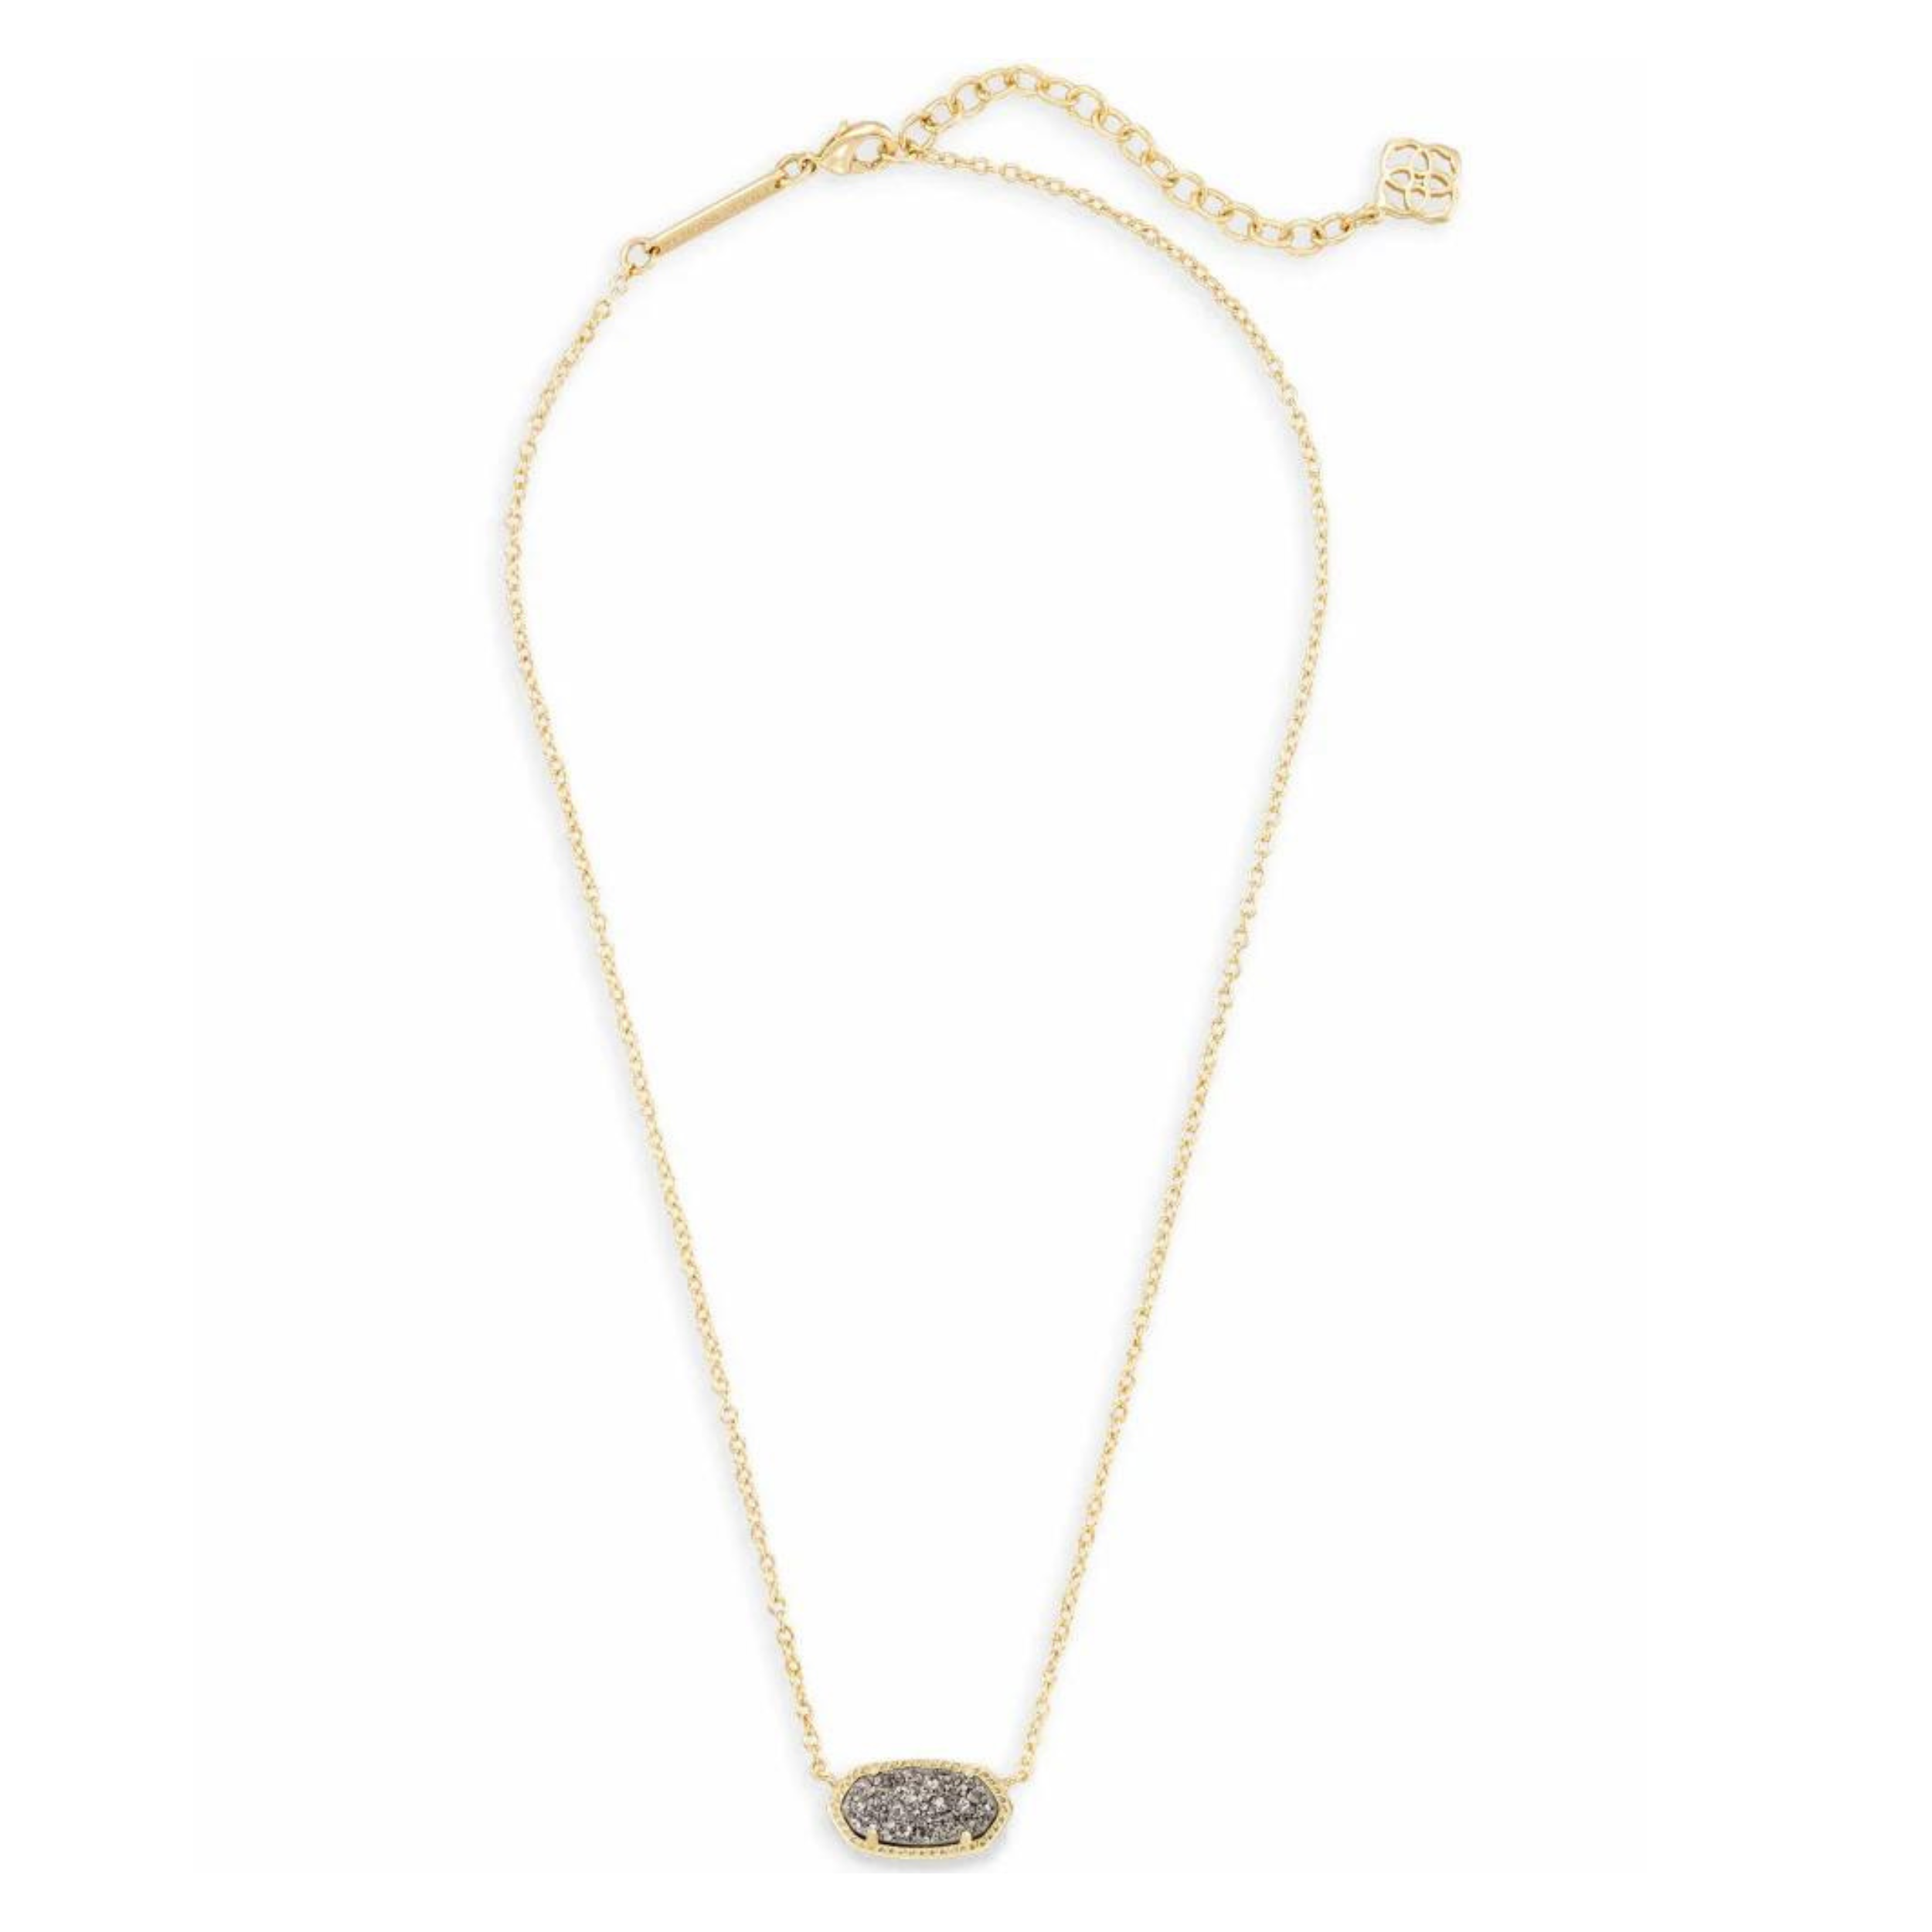 Kendra Scott | Elisa Gold Pendant Necklace in Platinum Drusy - Giddy Up Glamour Boutique